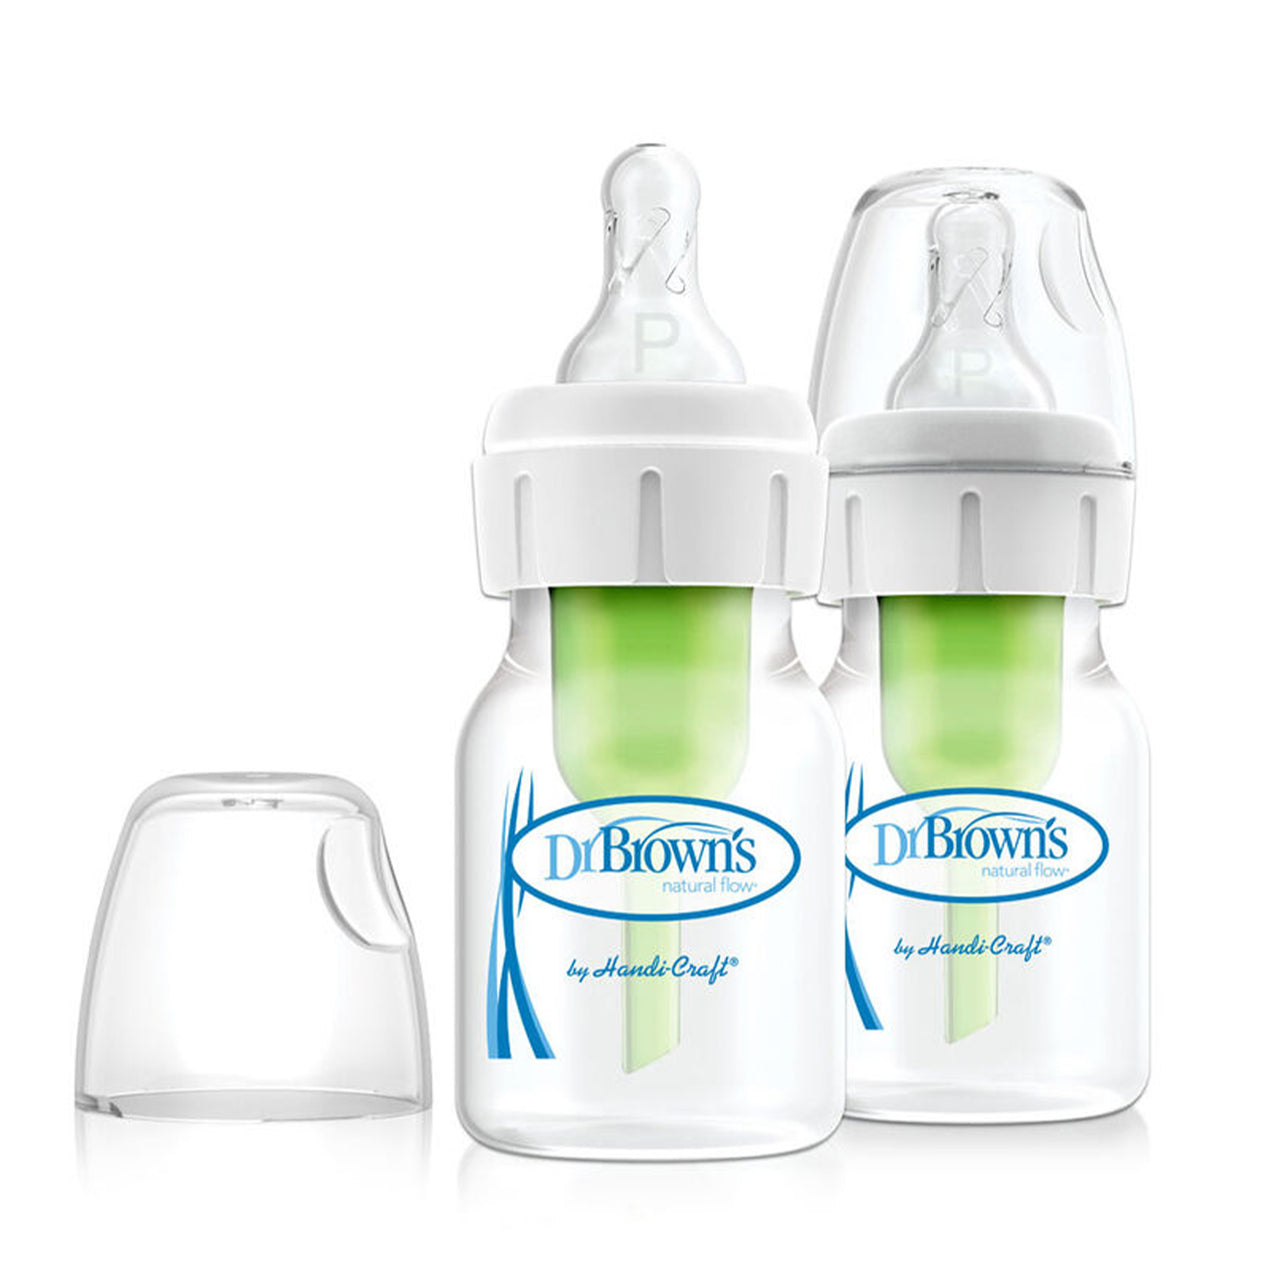 Dr. Brown's Natural Flow® Anti-Colic Narrow Baby Bottle, 2oz/60mL with  Preemie Flow™ Nipple, 2-Pack